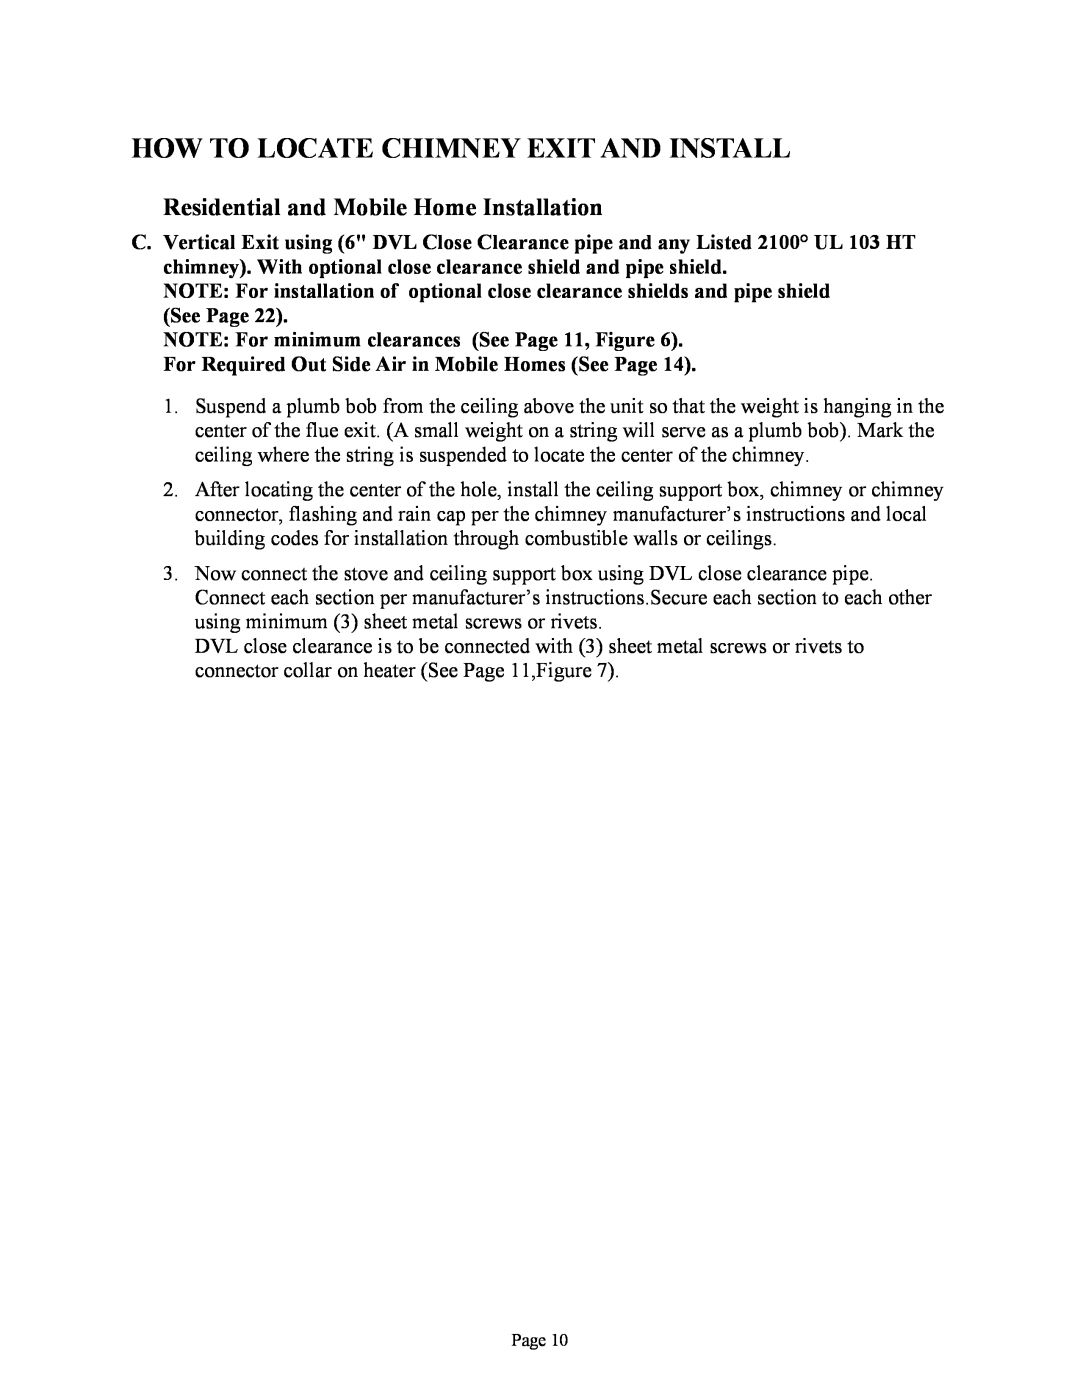 New Buck Corporation FS 21 installation instructions Residential and Mobile Home Installation 